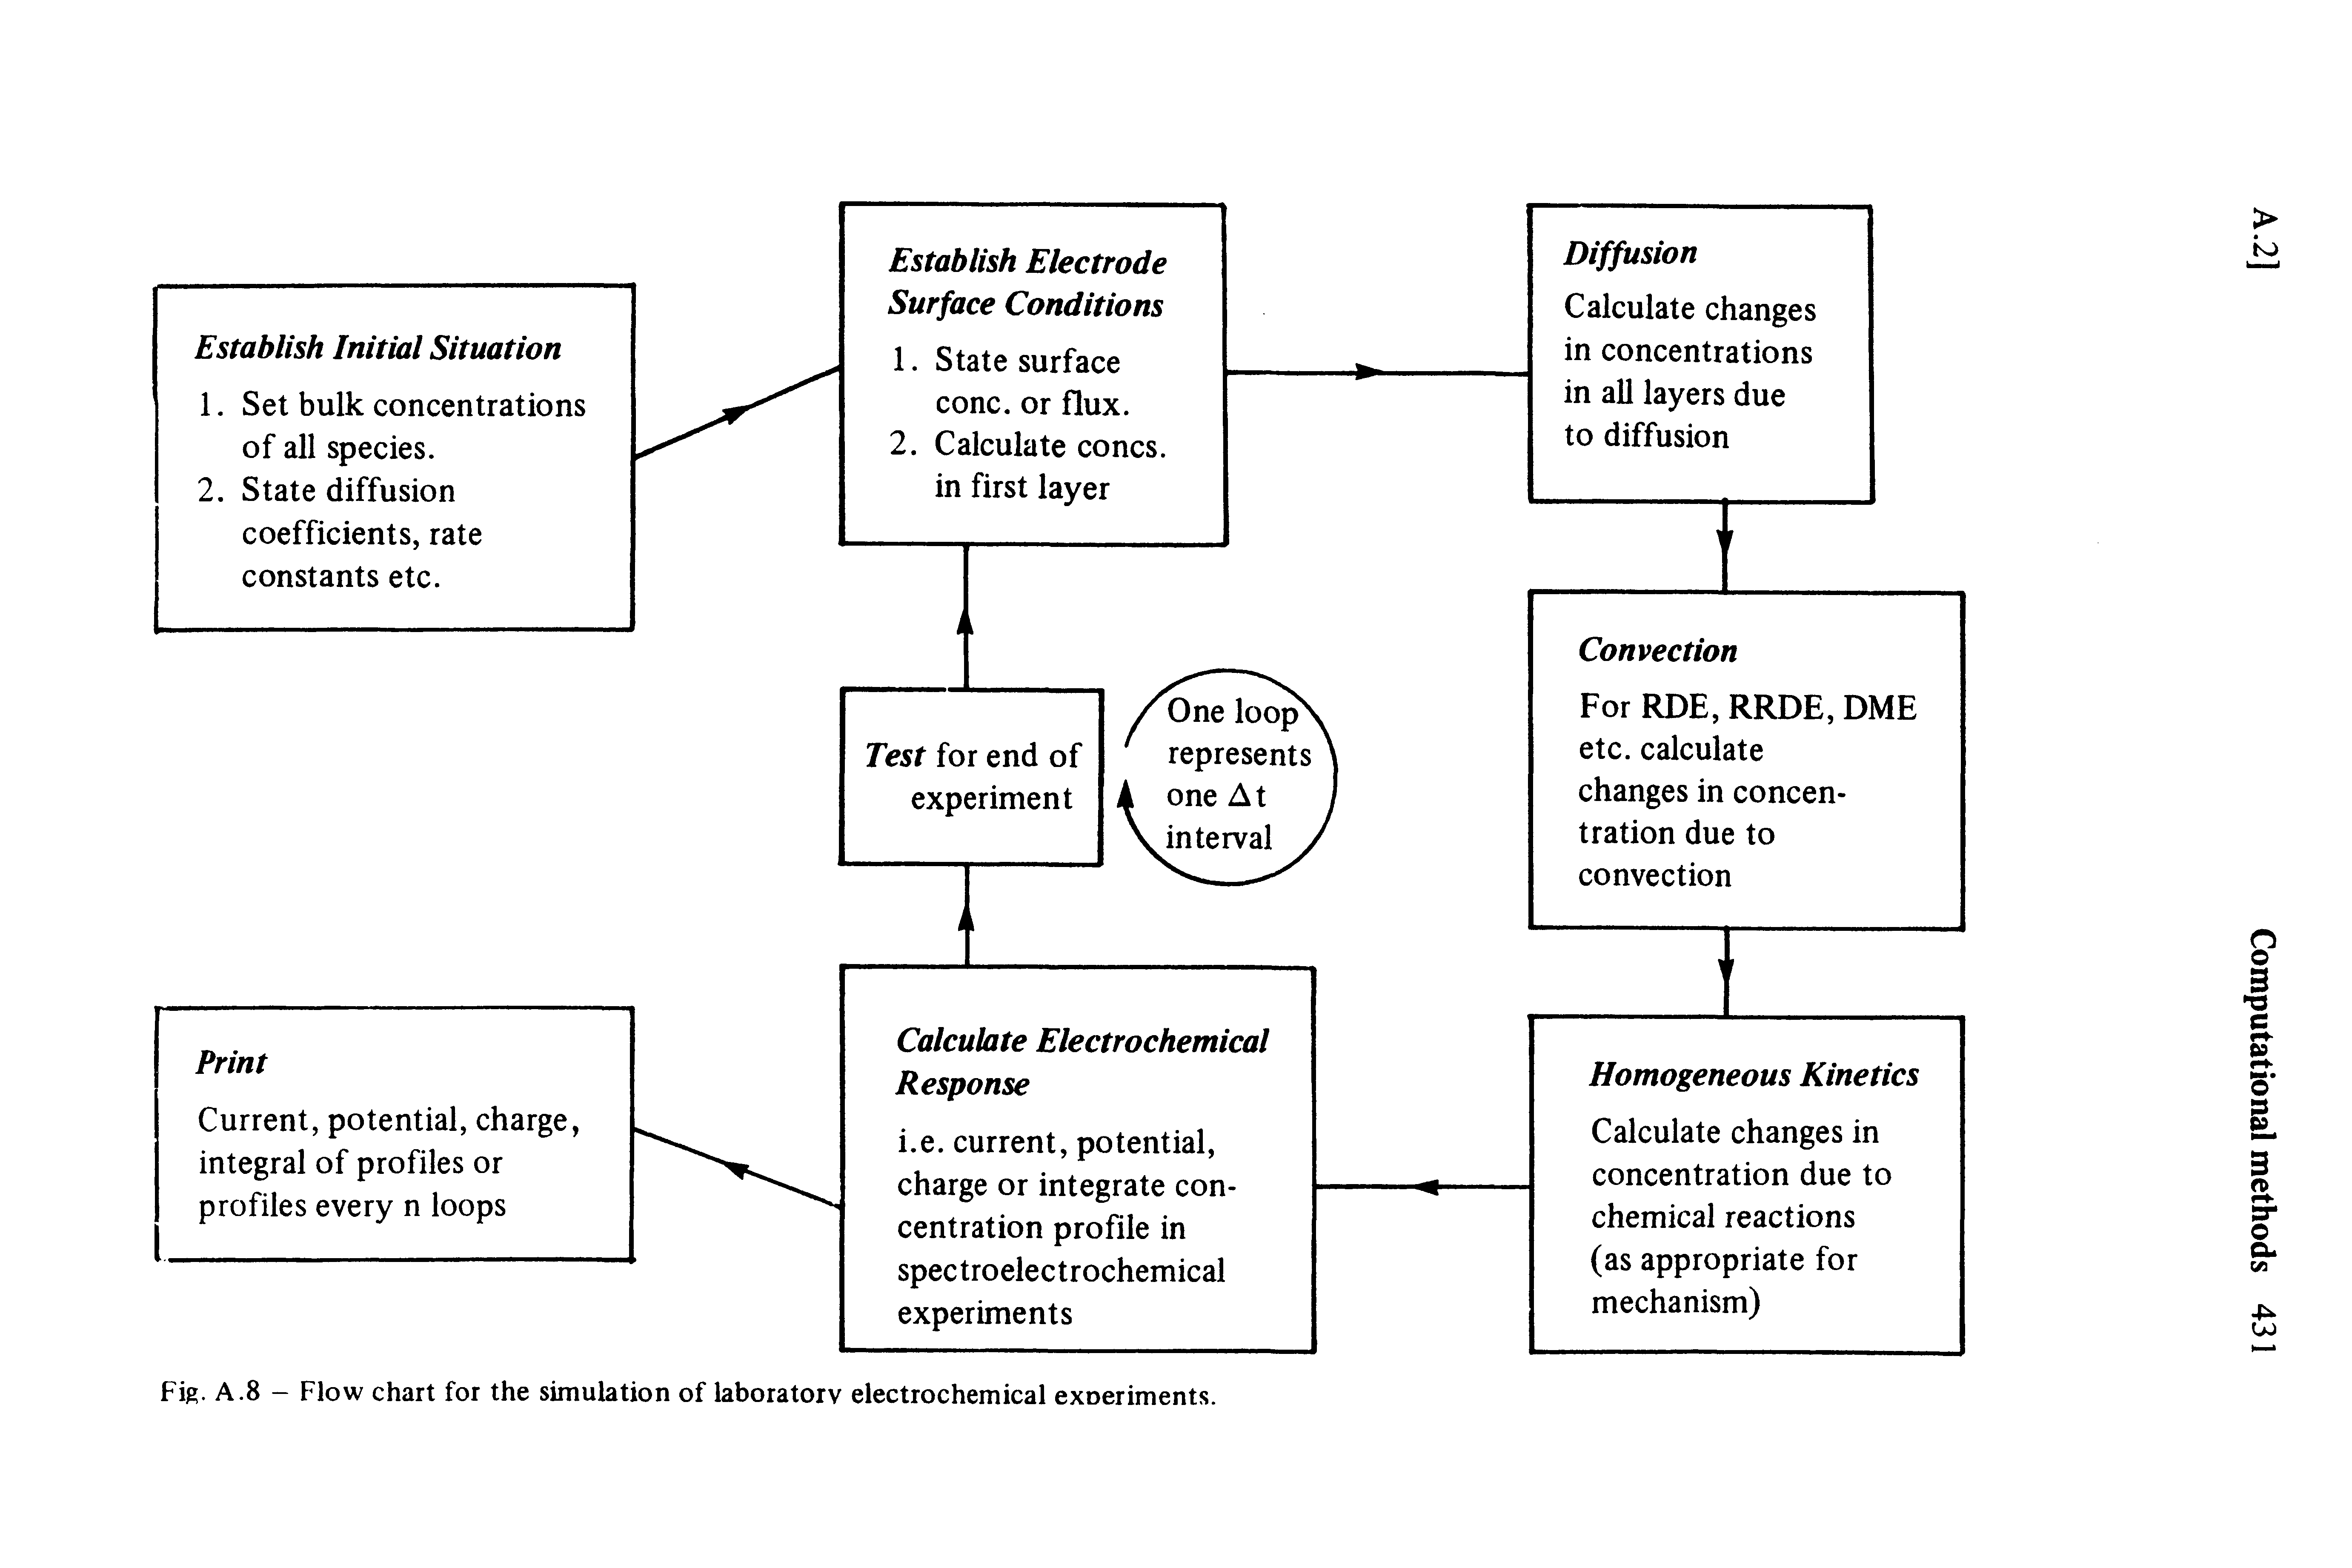 Fig. A.8 - Flow chart for the simulation of laboratory electrochemical exoeriments.